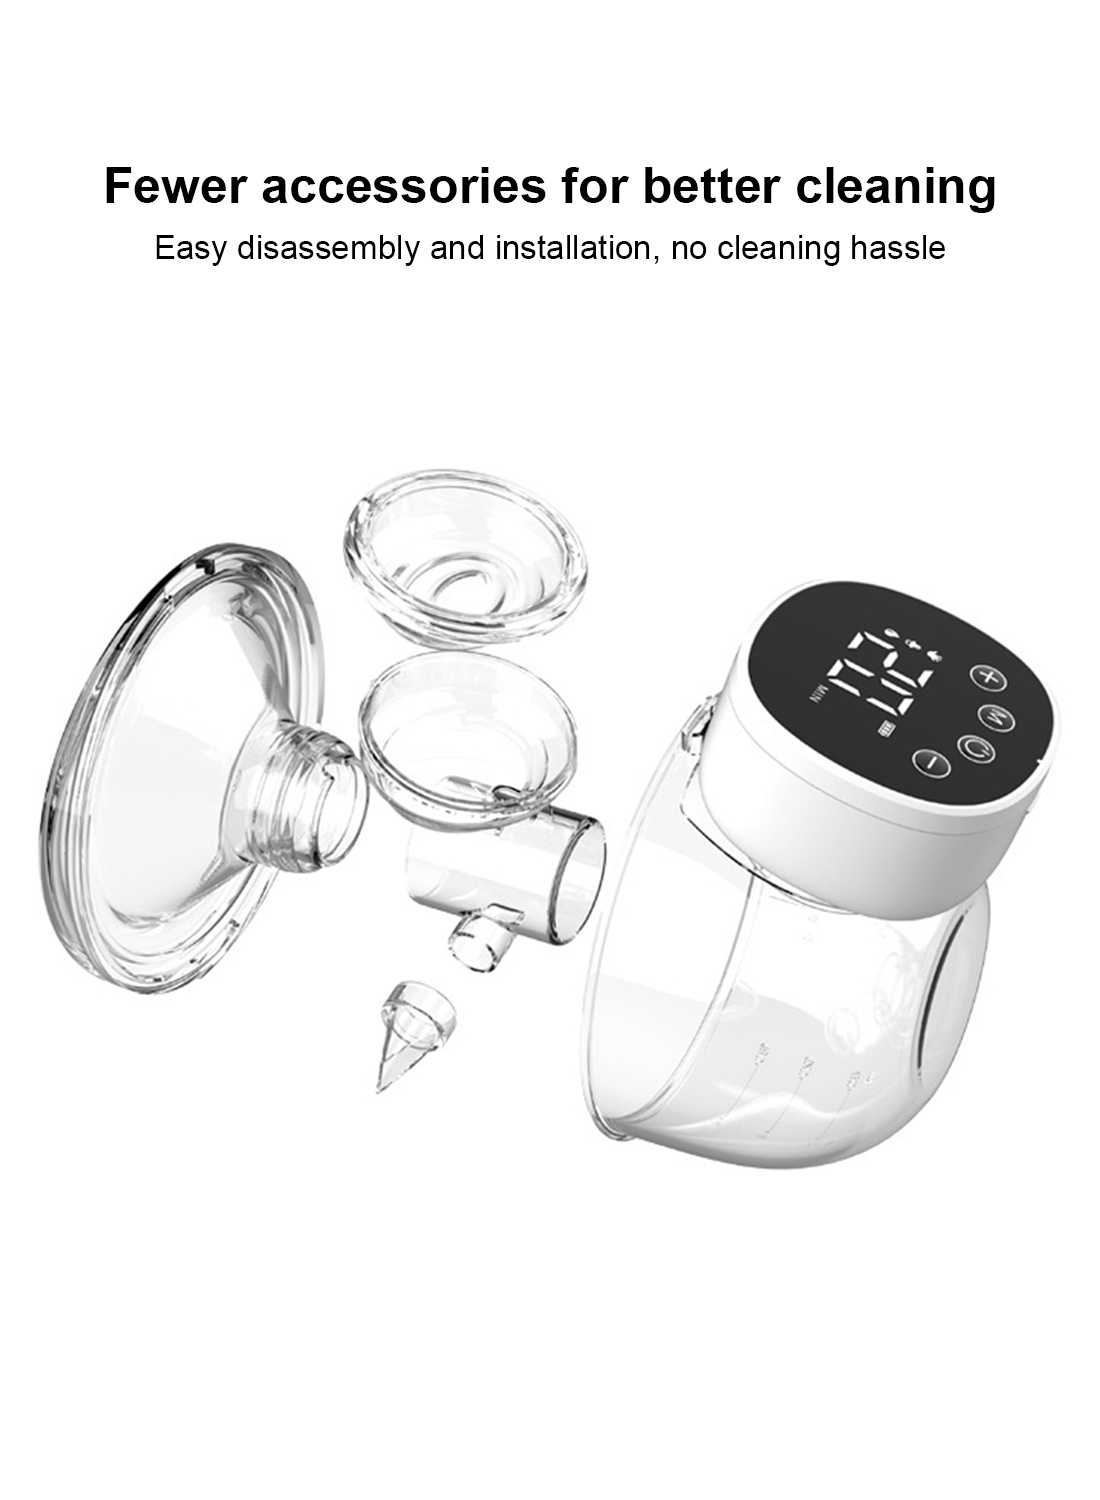 Electric Breast Pump, Silent, Fully Automatic Wearable Breast Pump